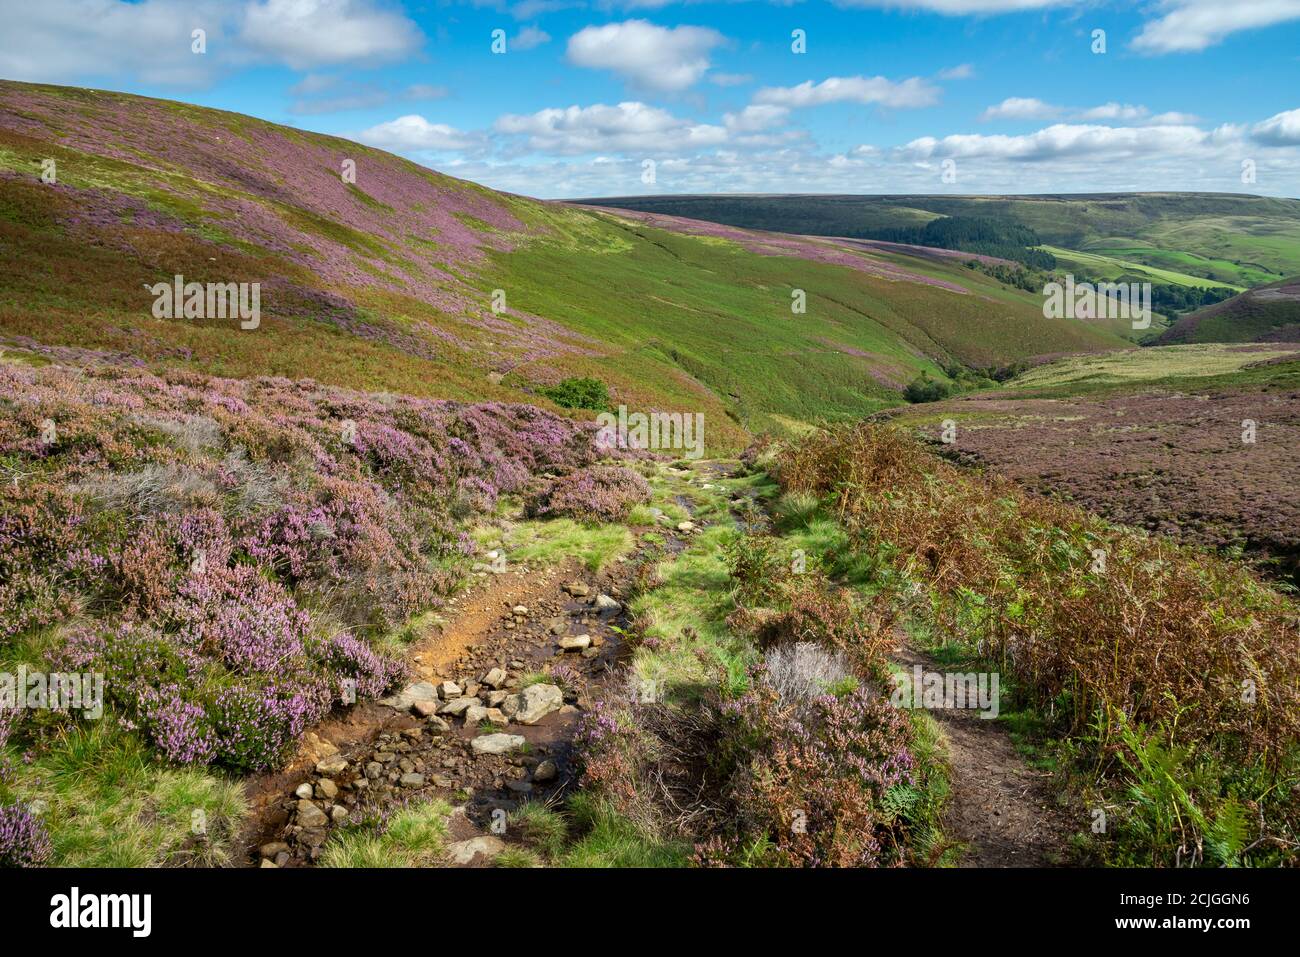 Path along Fairbrook leading up to the northern edge of Kinder Scout, Peak District, Derbyshire, England. Heather in bloom on the moorland slopes. Stock Photo